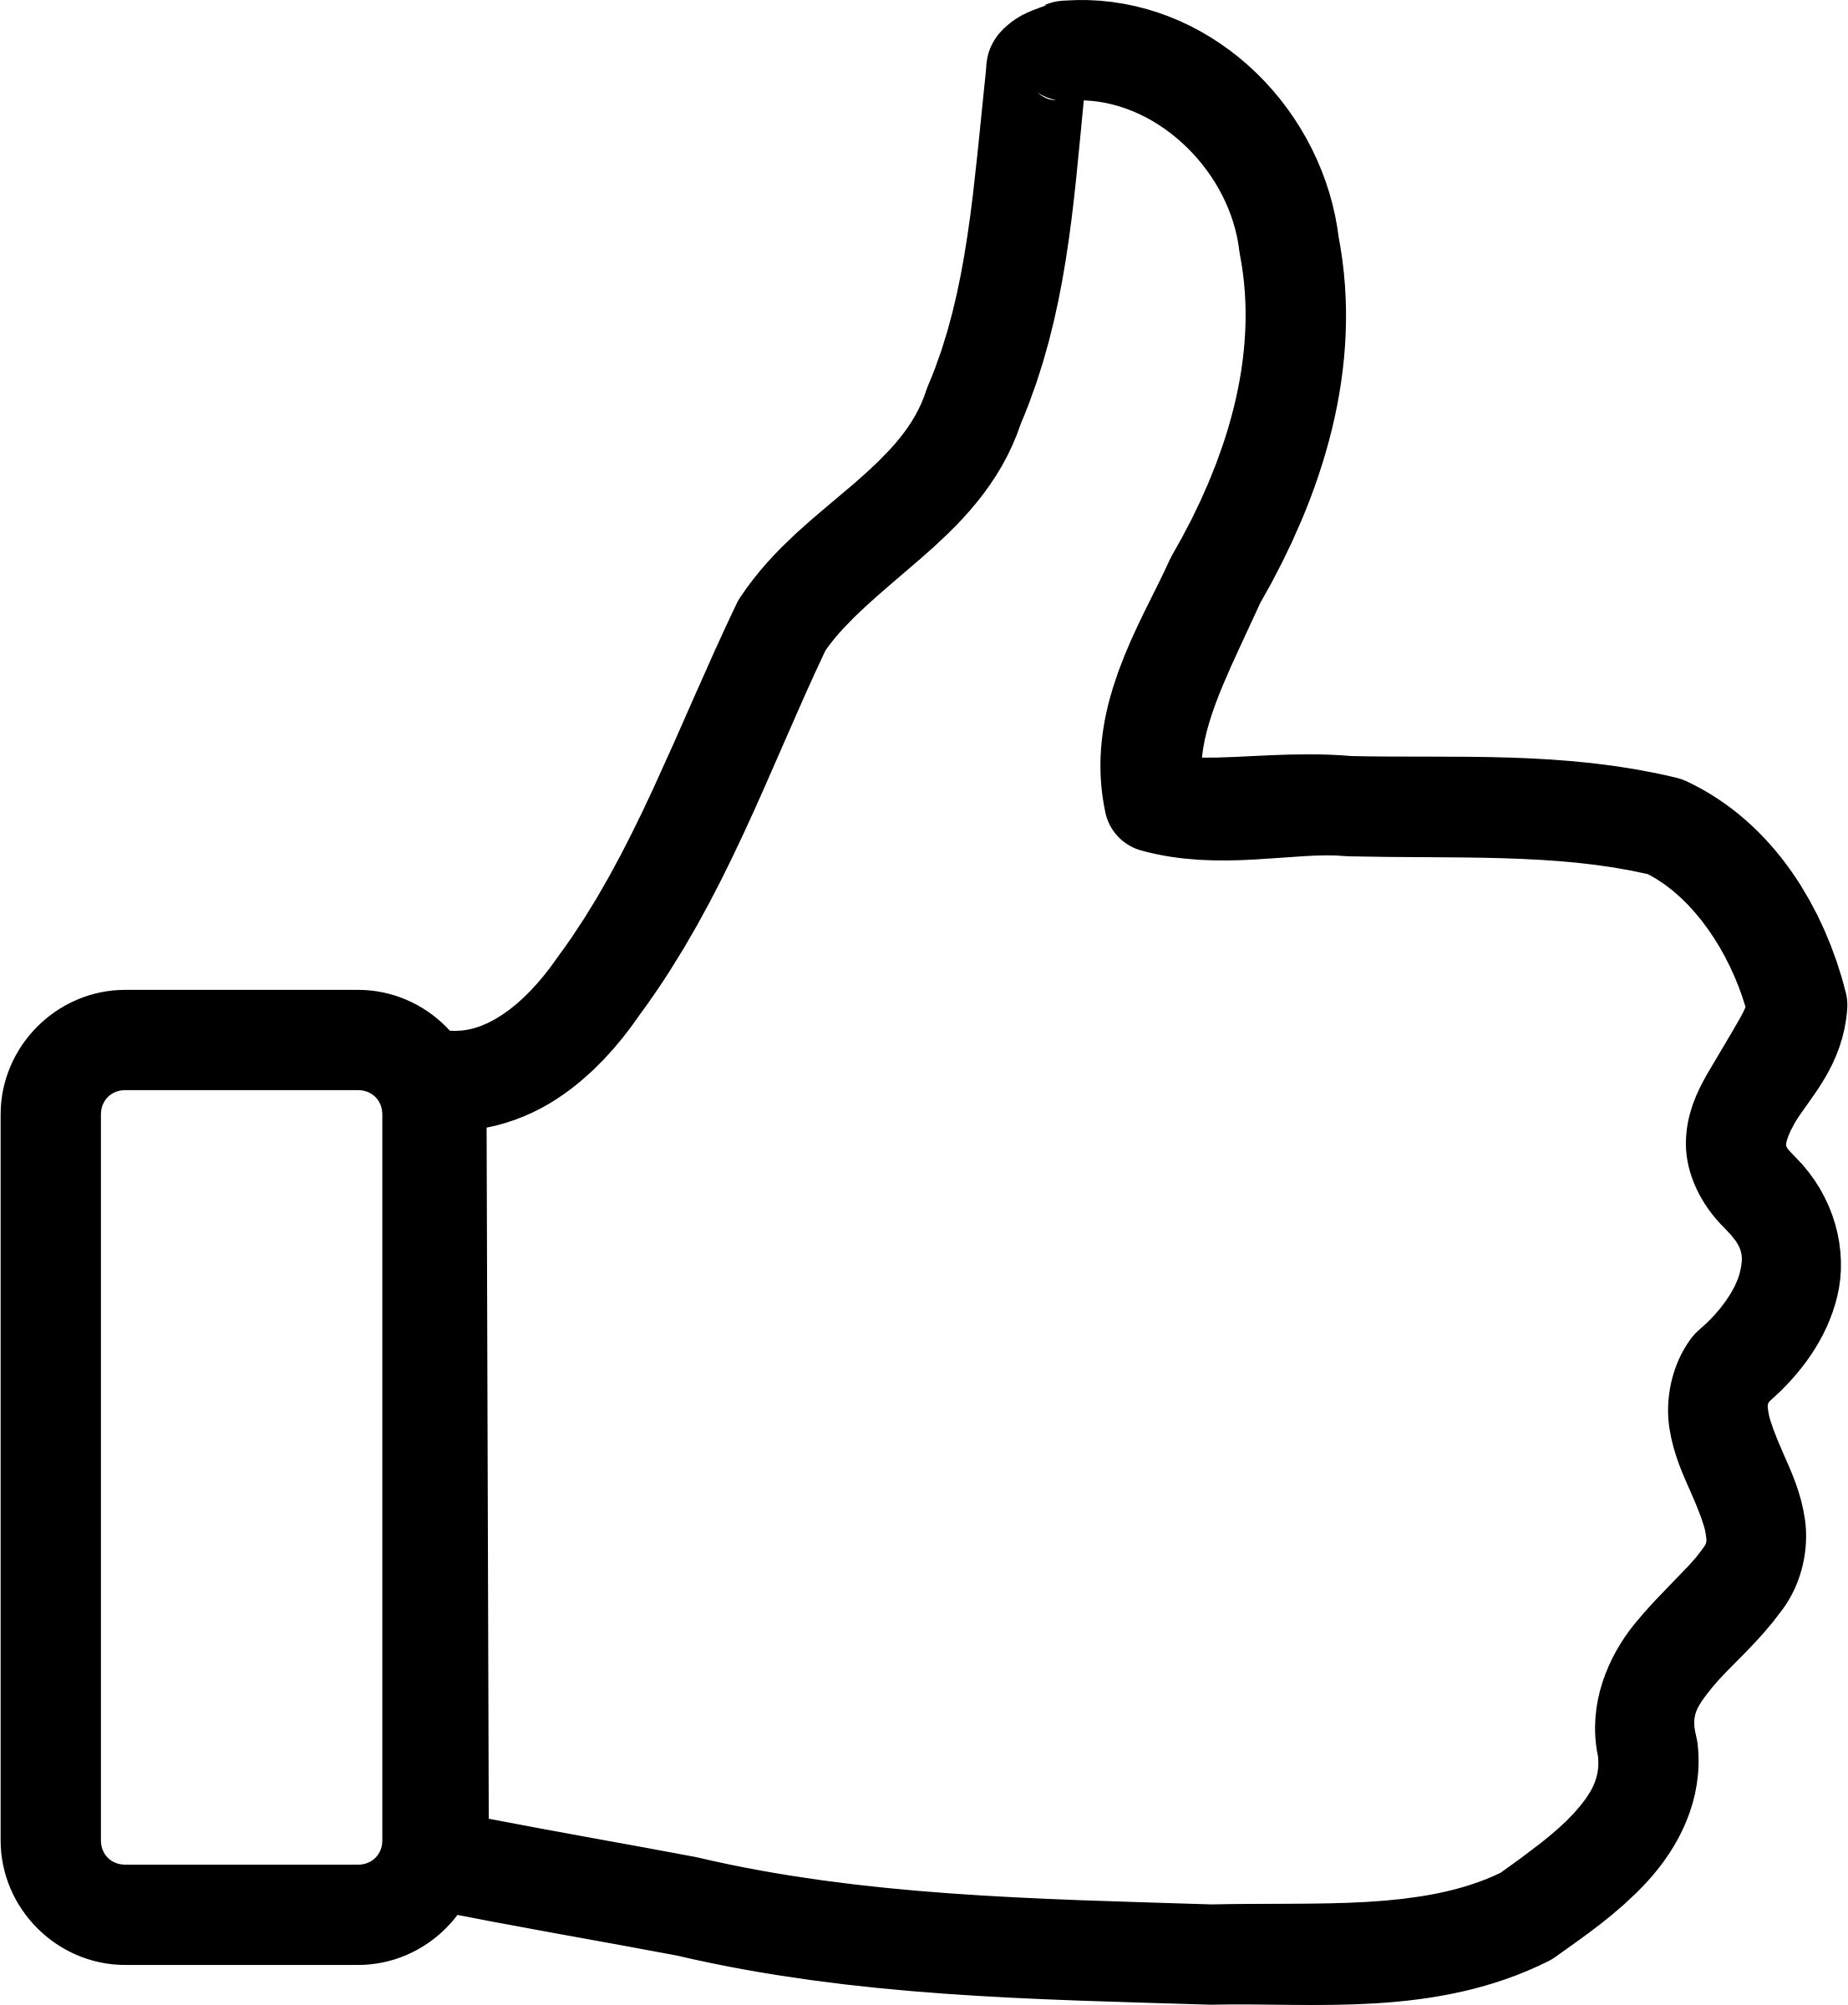 Thumbs up clipart black and white